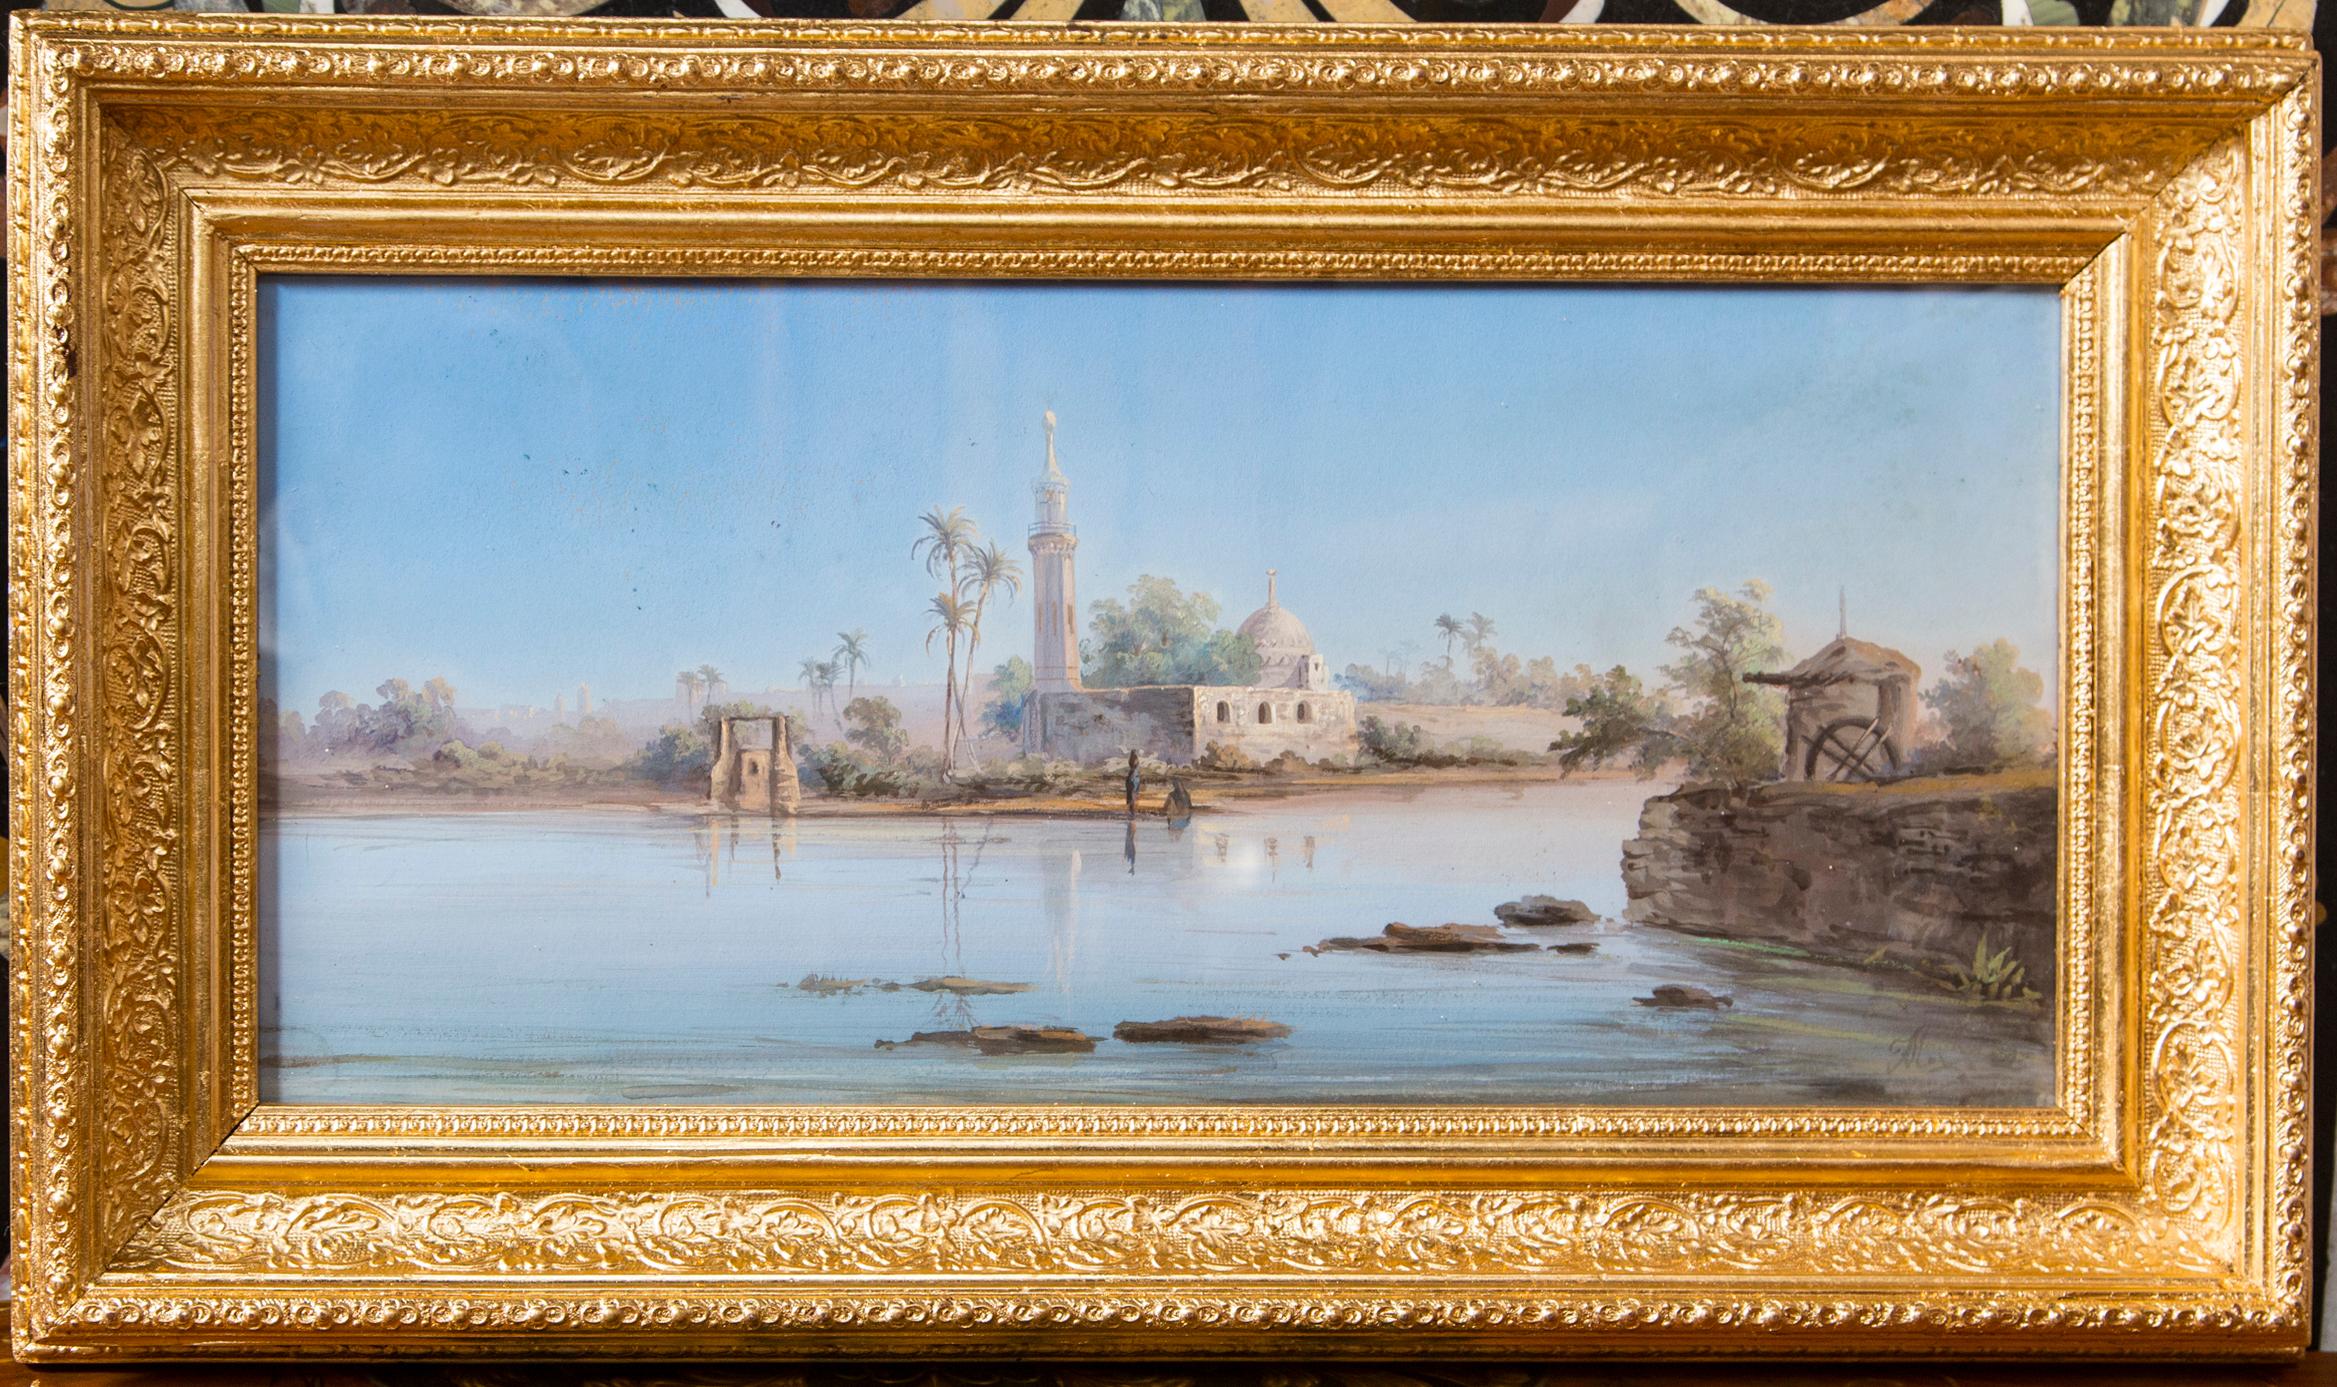 Set within newly gilded wood frames. Each is illegibly signed.
One of figures seated and standing along a lake or riverbank. Dwellings and palm trees in the background.
The other  of  a   minaret  and other  structures.  